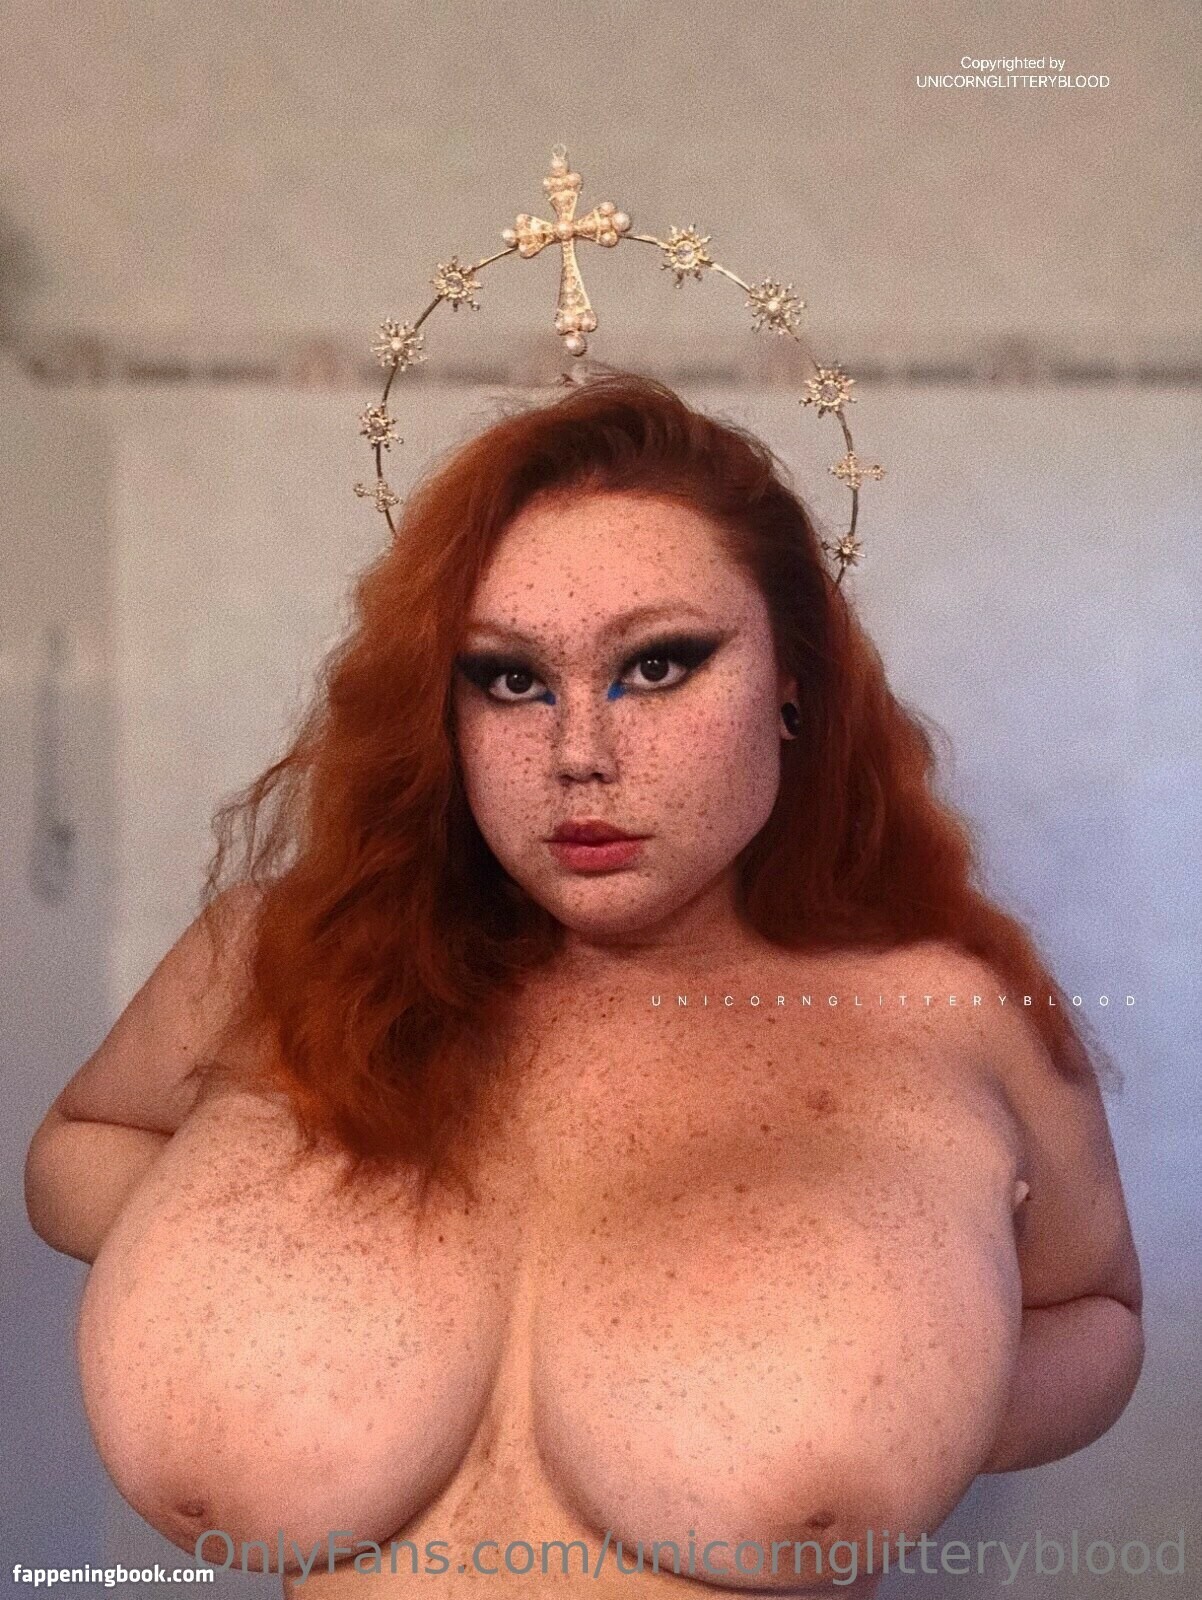 Unicornglitteryblood Unicornglitteryblood Nude Onlyfans Leaks The